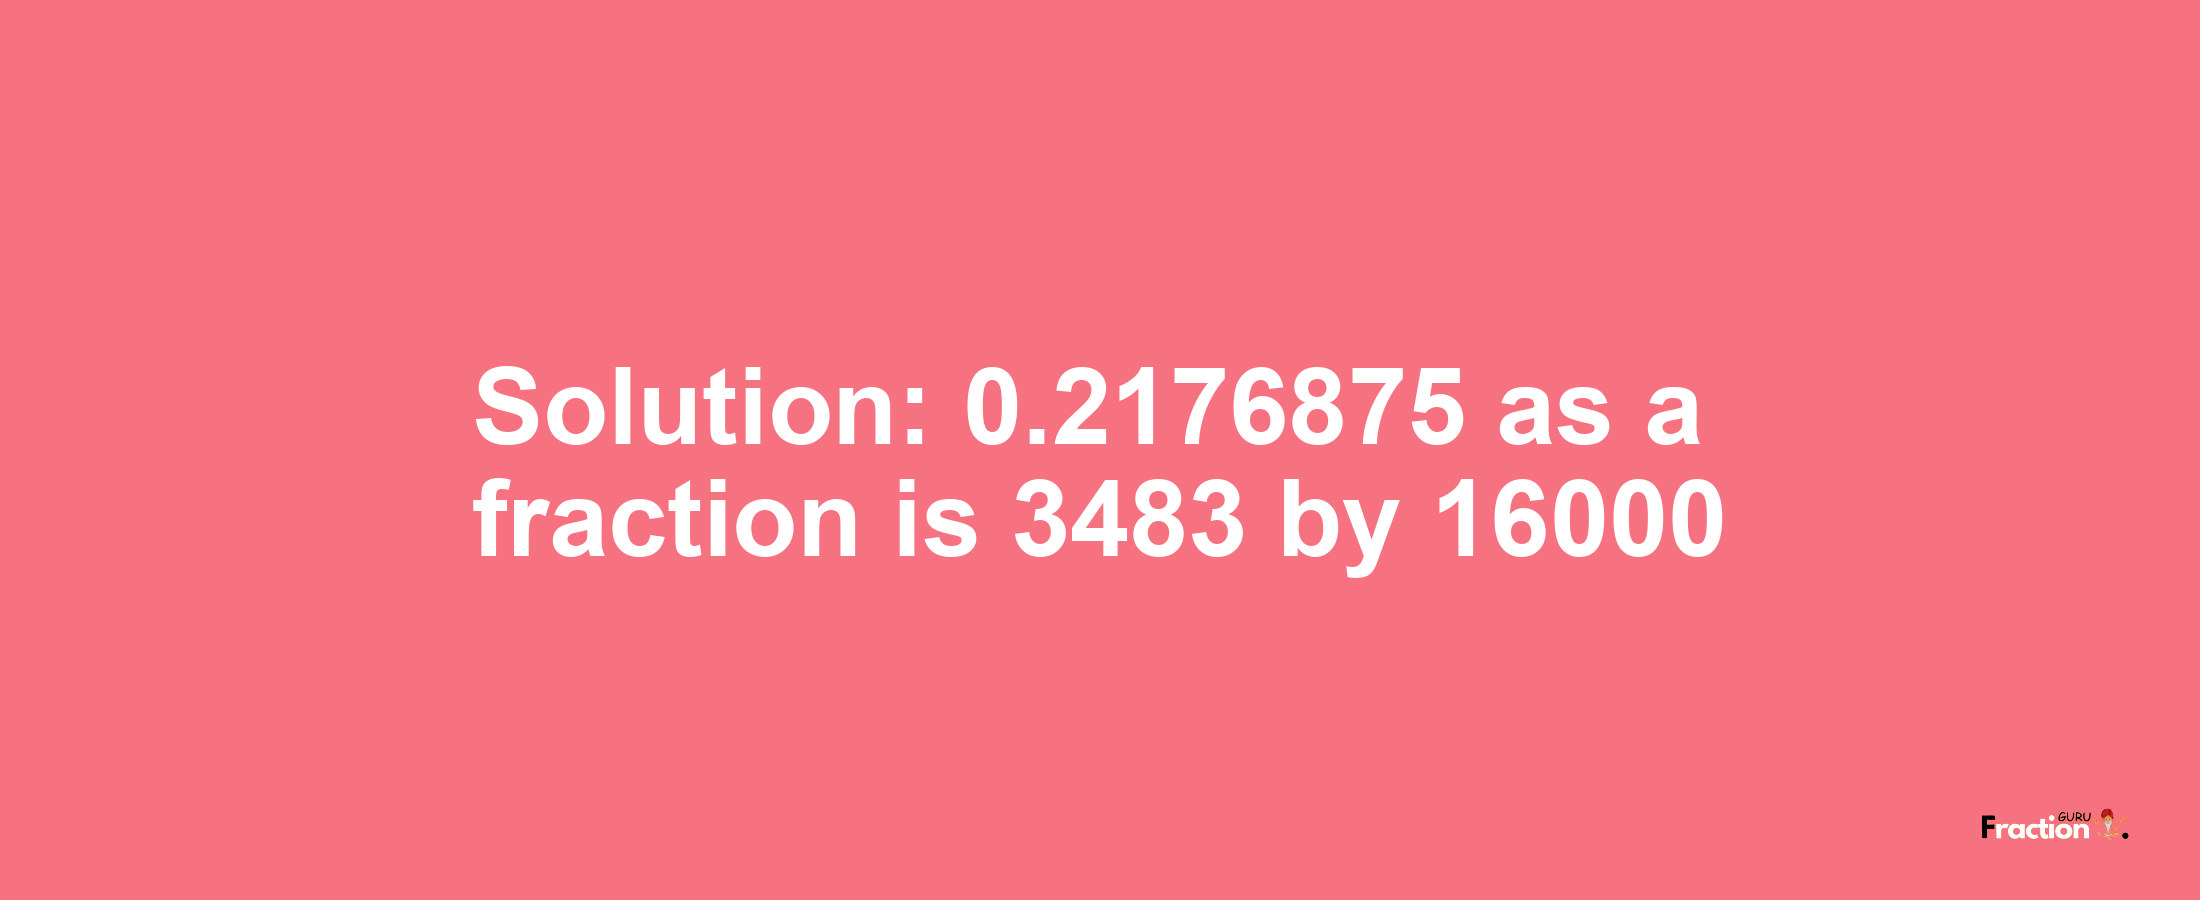 Solution:0.2176875 as a fraction is 3483/16000